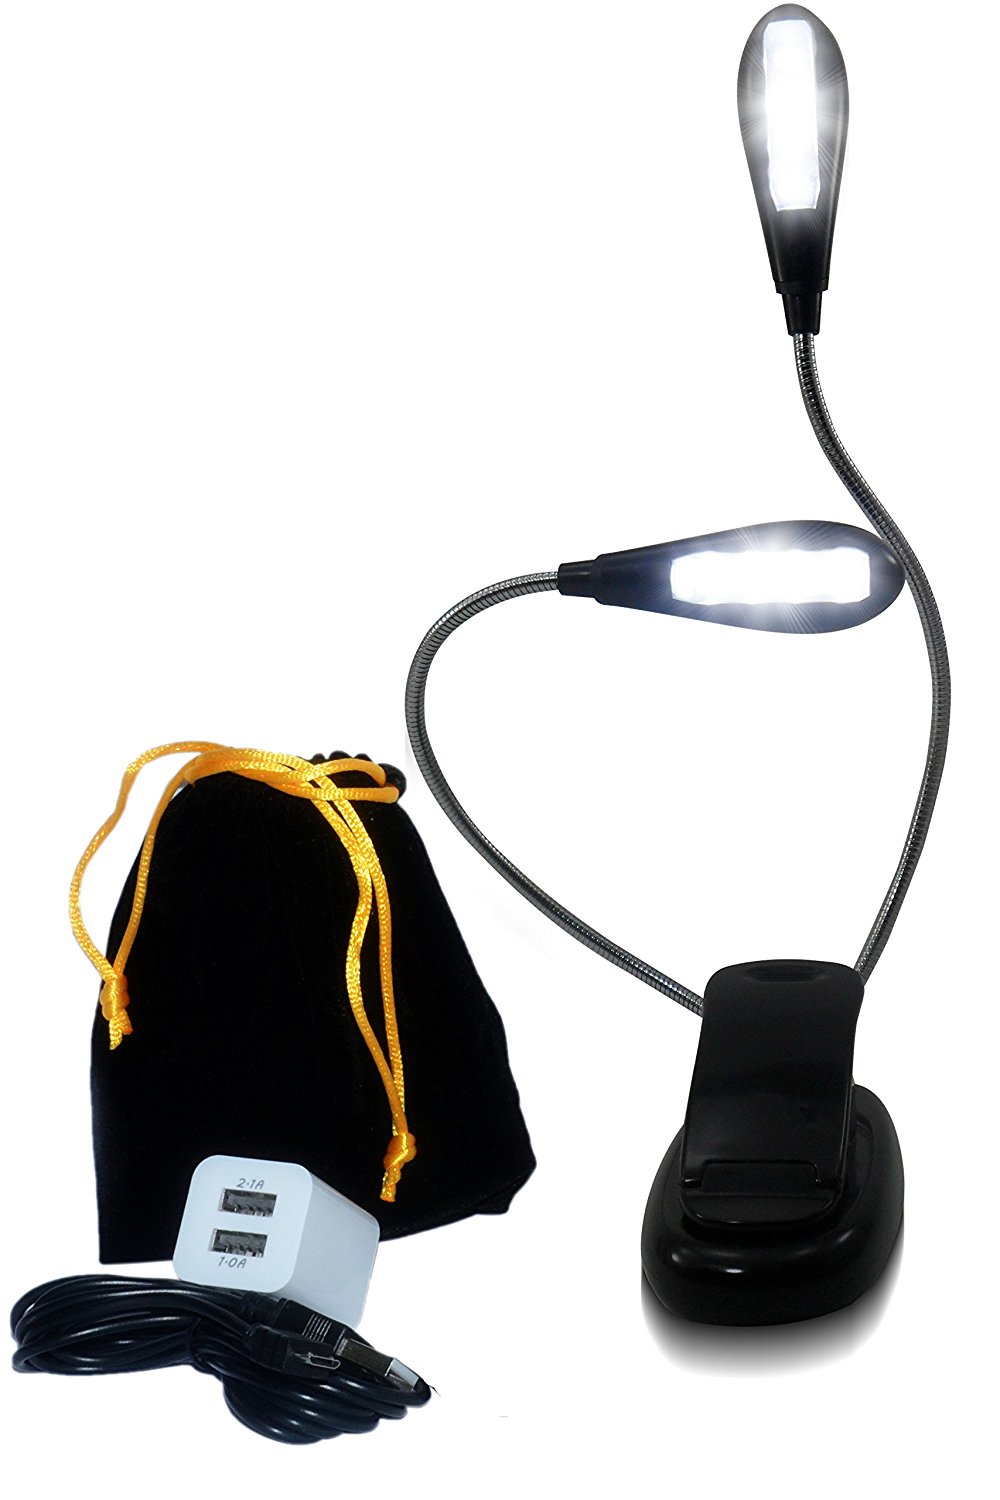 Personal Lamp for Reading in Bed & Music Stand Light